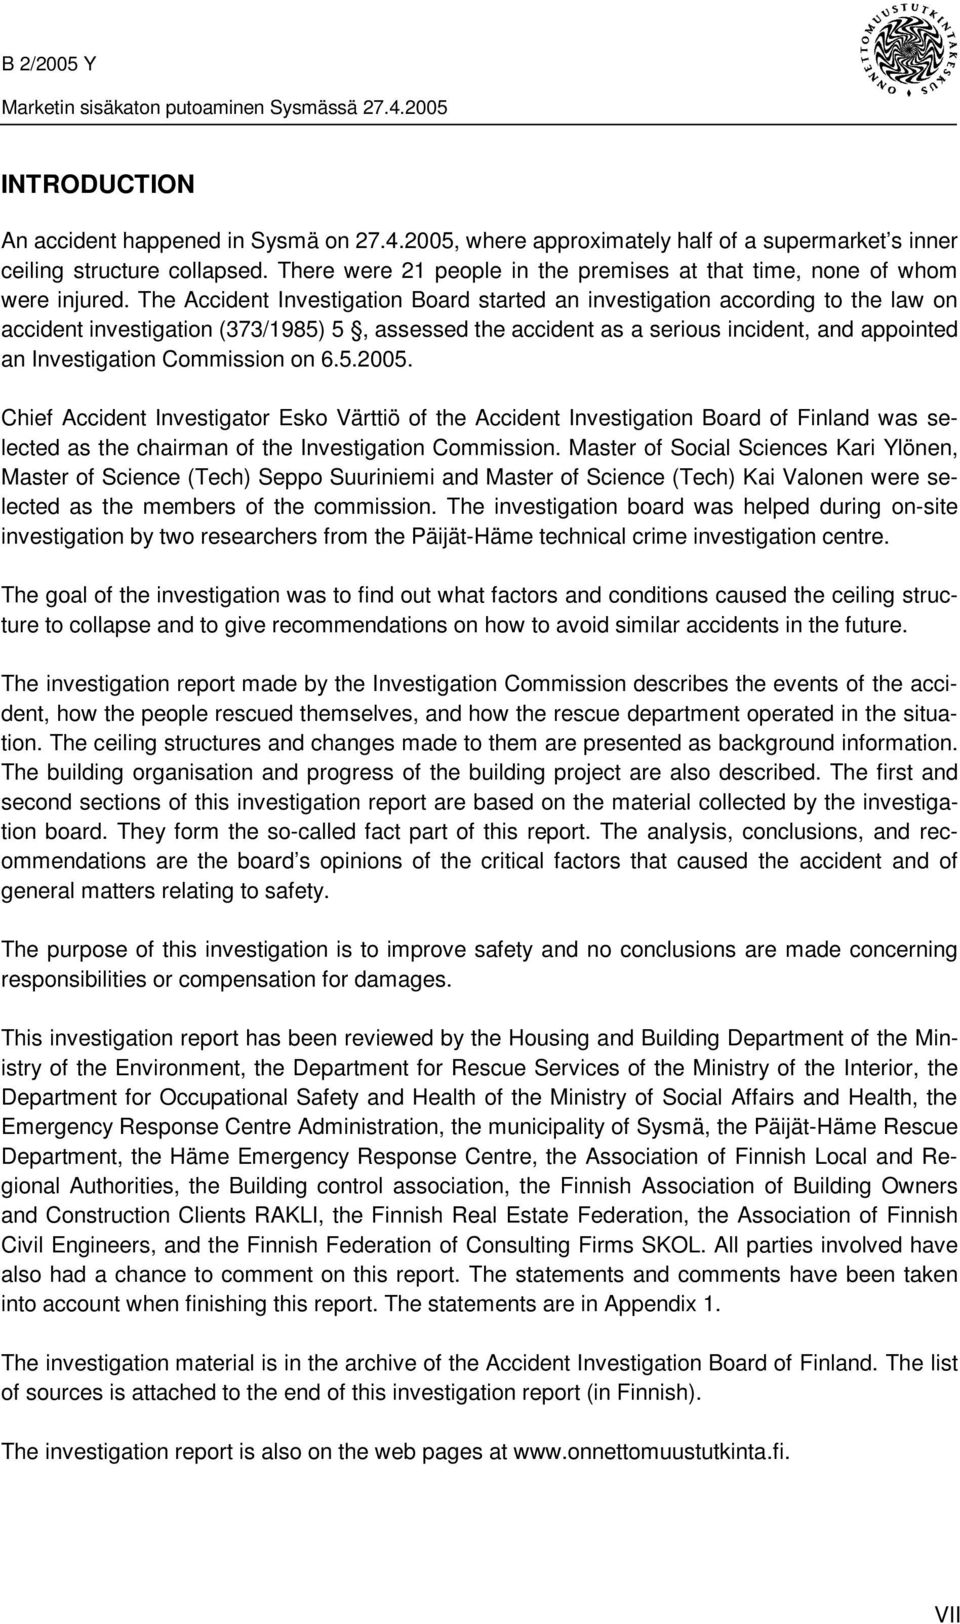 The Accident Investigation Board started an investigation according to the law on accident investigation (373/1985) 5, assessed the accident as a serious incident, and appointed an Investigation